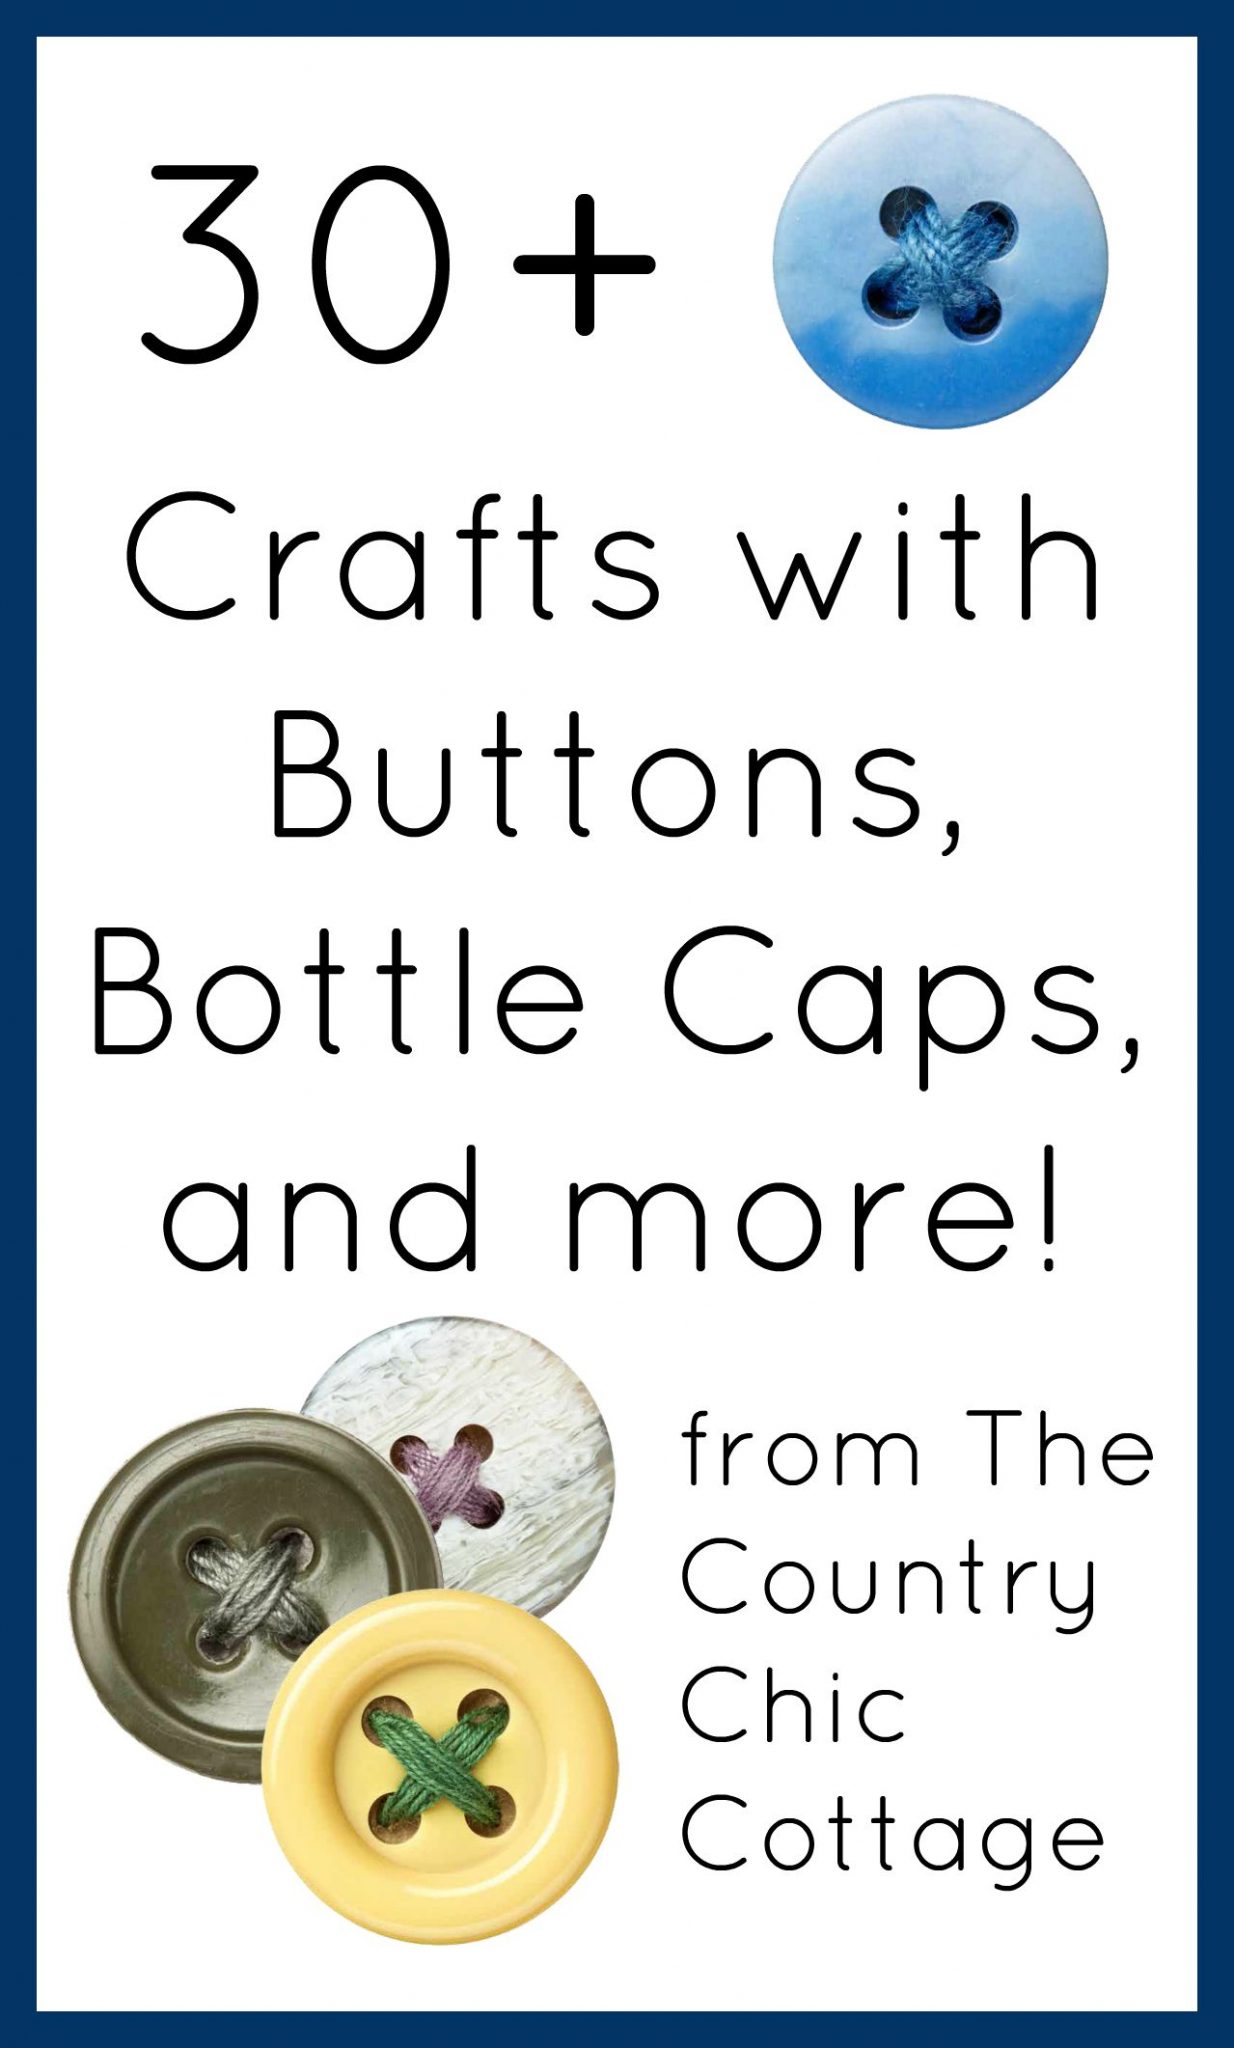 Over 30 crafts with buttons, bottle caps, and more!